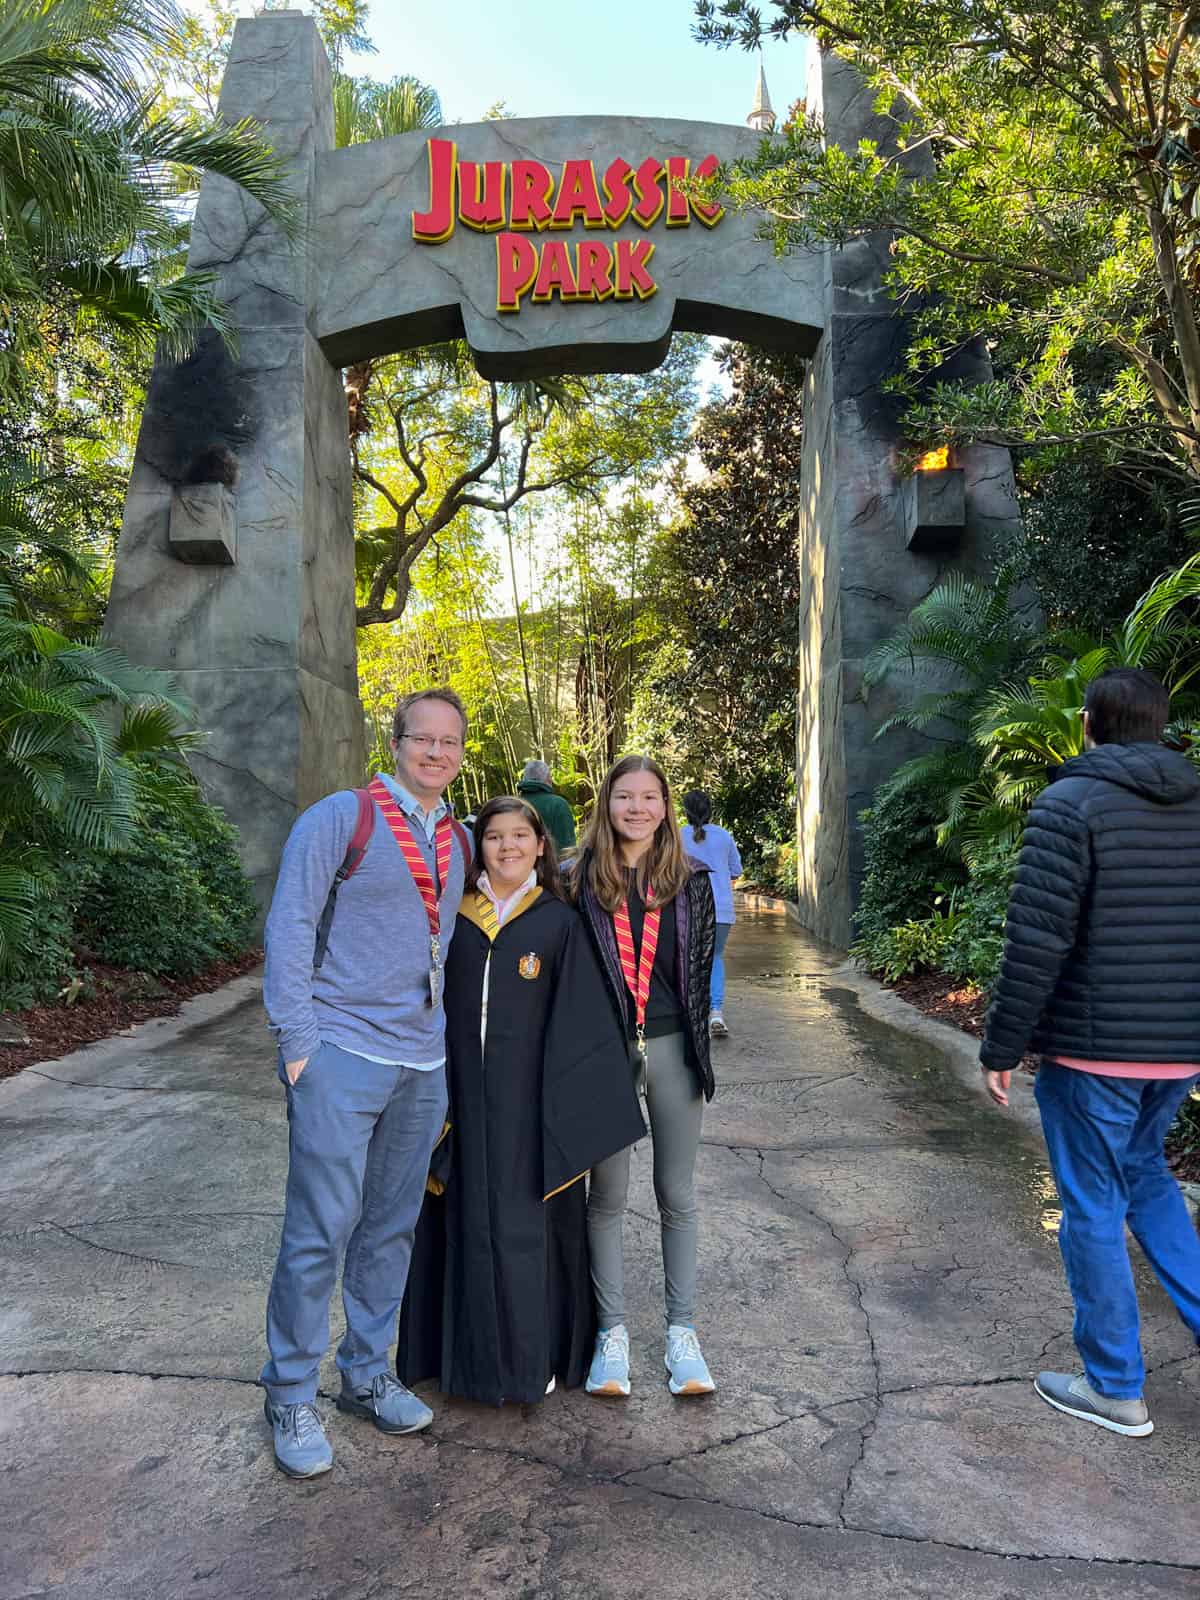 A dad and two daughters in front of the Jurassic Park sign at Universal Islands of Adventure theme park.